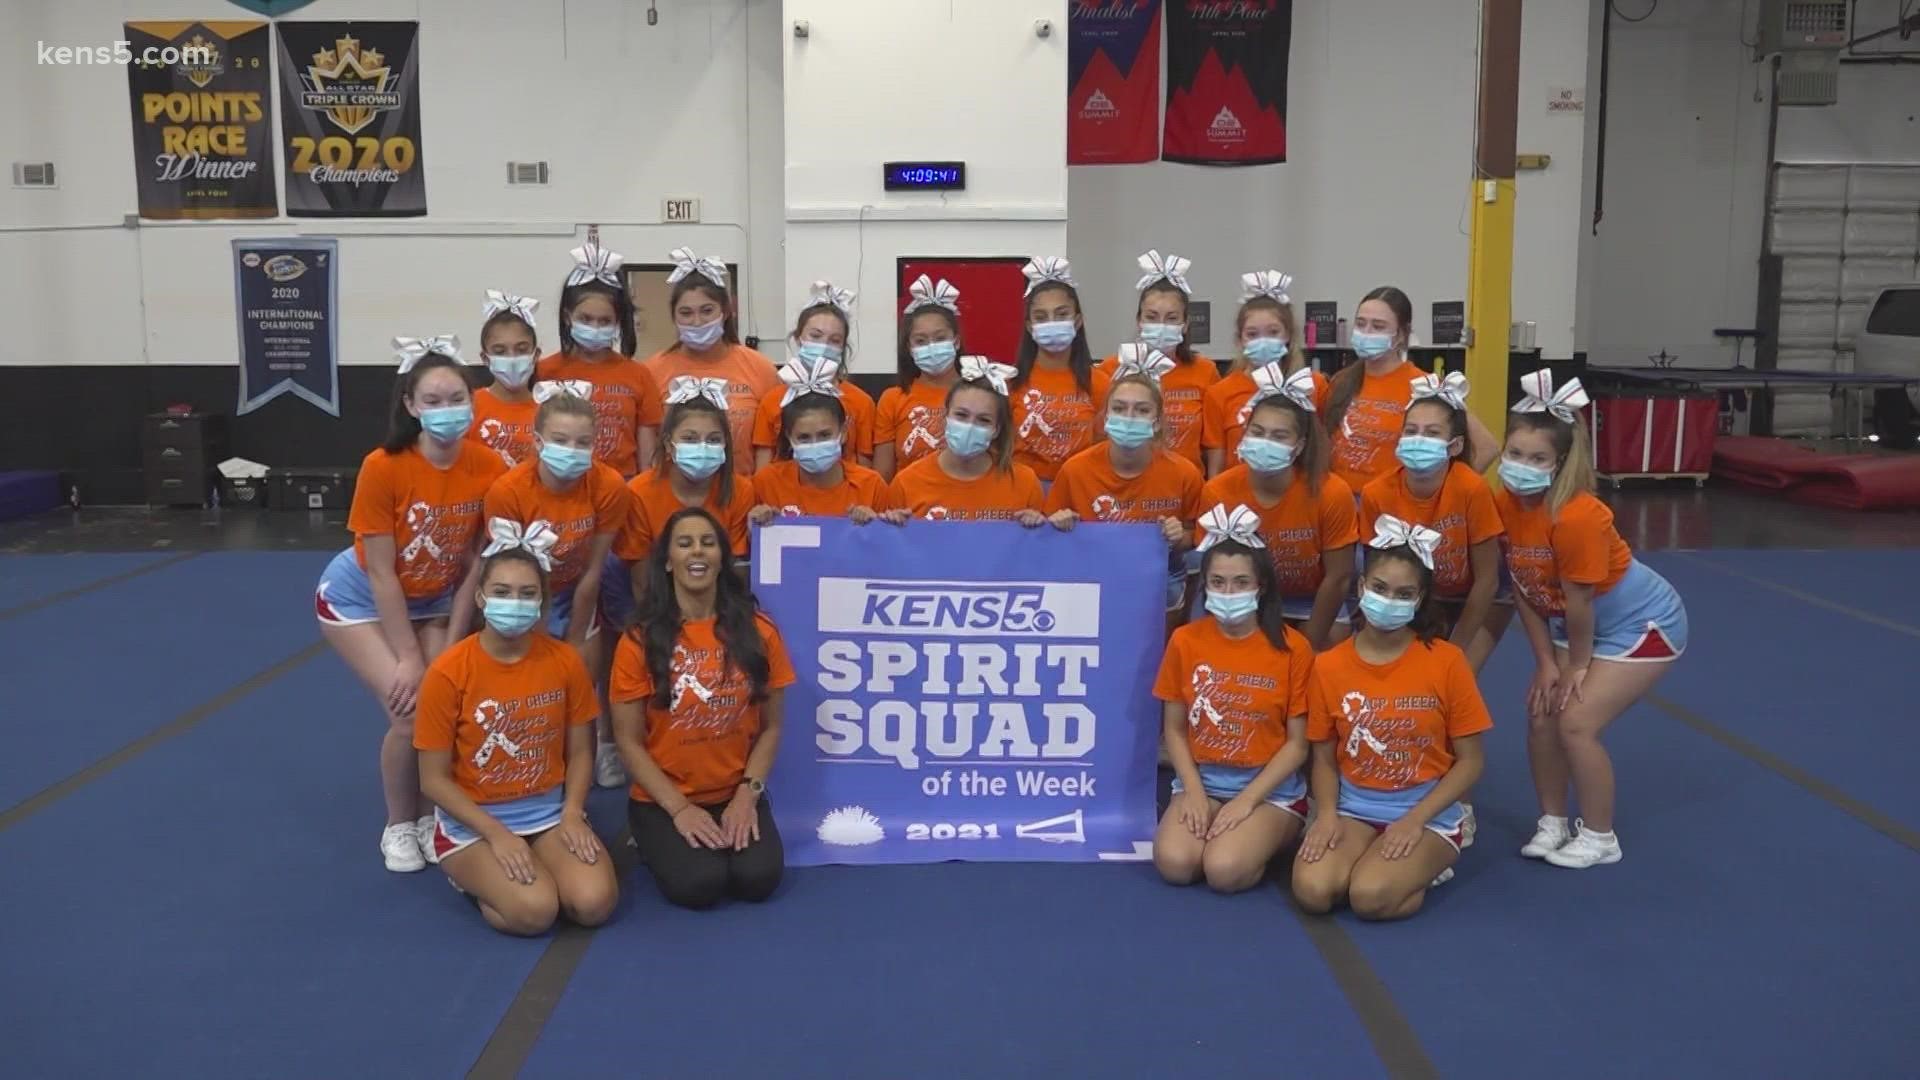 KENS 5's Erica Ross has the story of this week's spirit squad and how they're lifting up their coach even while preparing for competition.